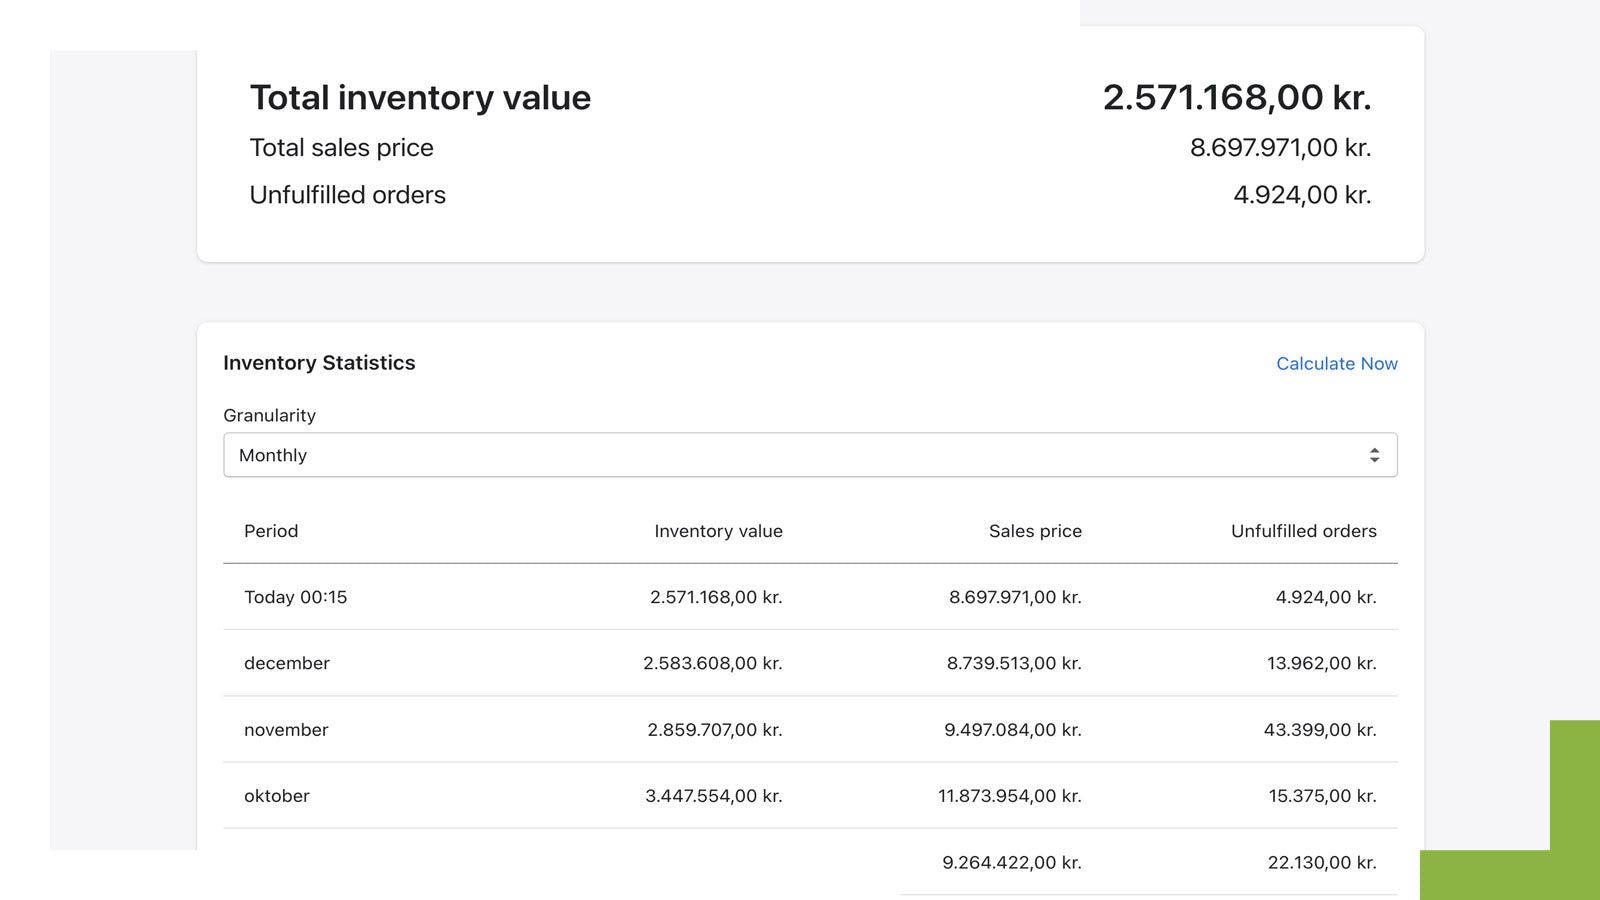 Easy overview of inventory value